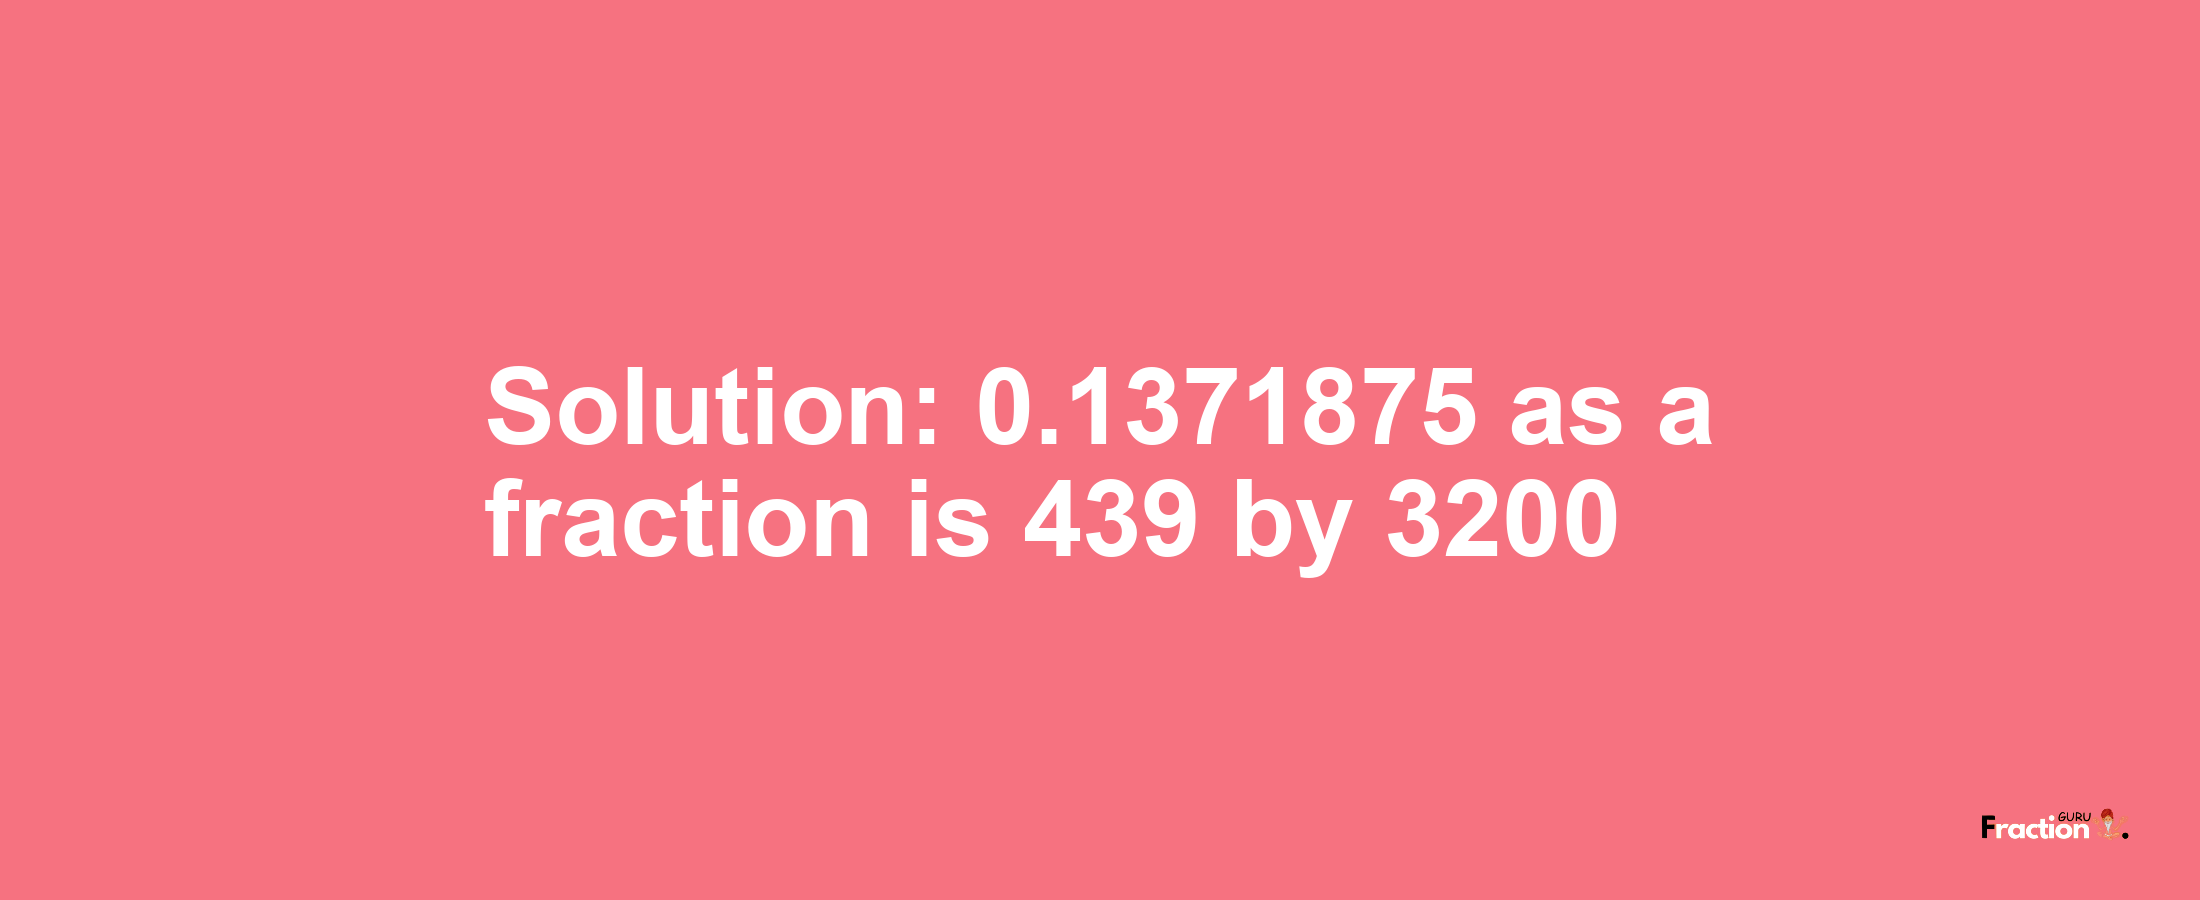 Solution:0.1371875 as a fraction is 439/3200